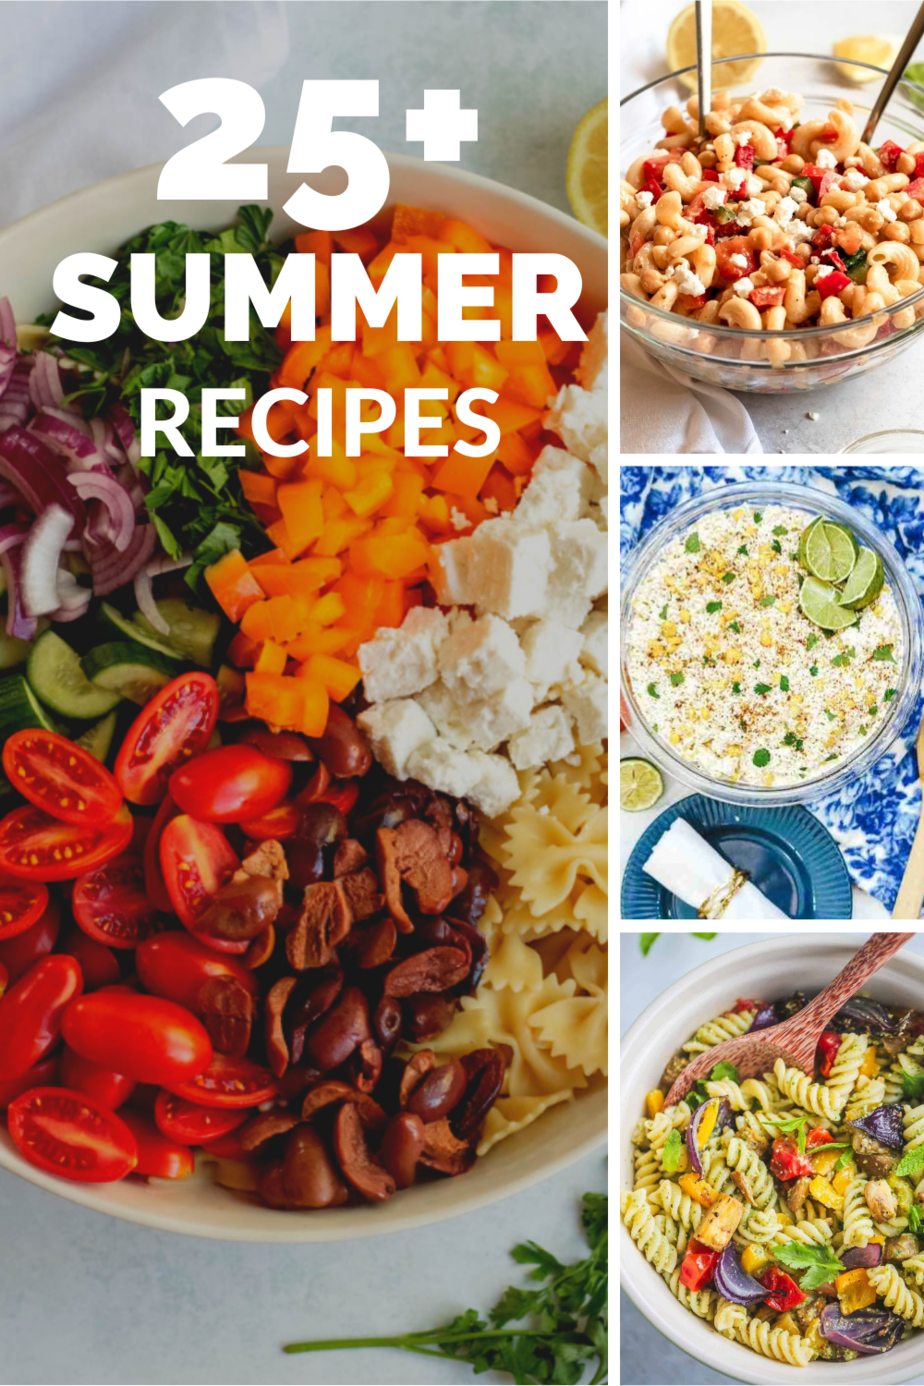 These summer recipes are colorful, healthy and delicious - and perfect for feeding a crowd!